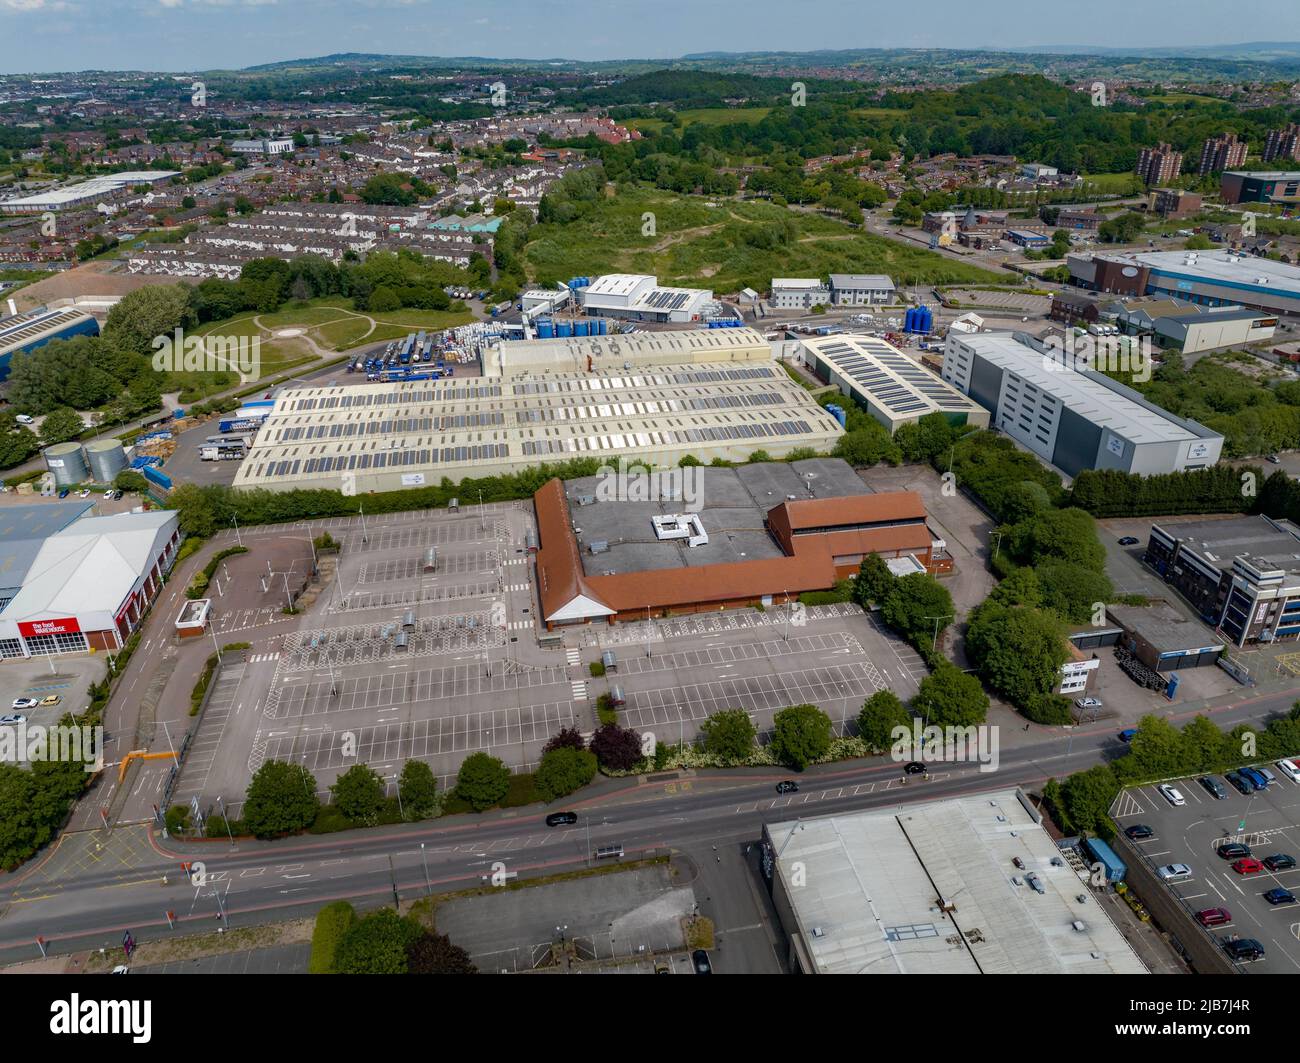 Aerial Image of the now Abandoned Building  Sainsburys Supermarket Hanley Stoke on Trent Staffordshire Stock Photo